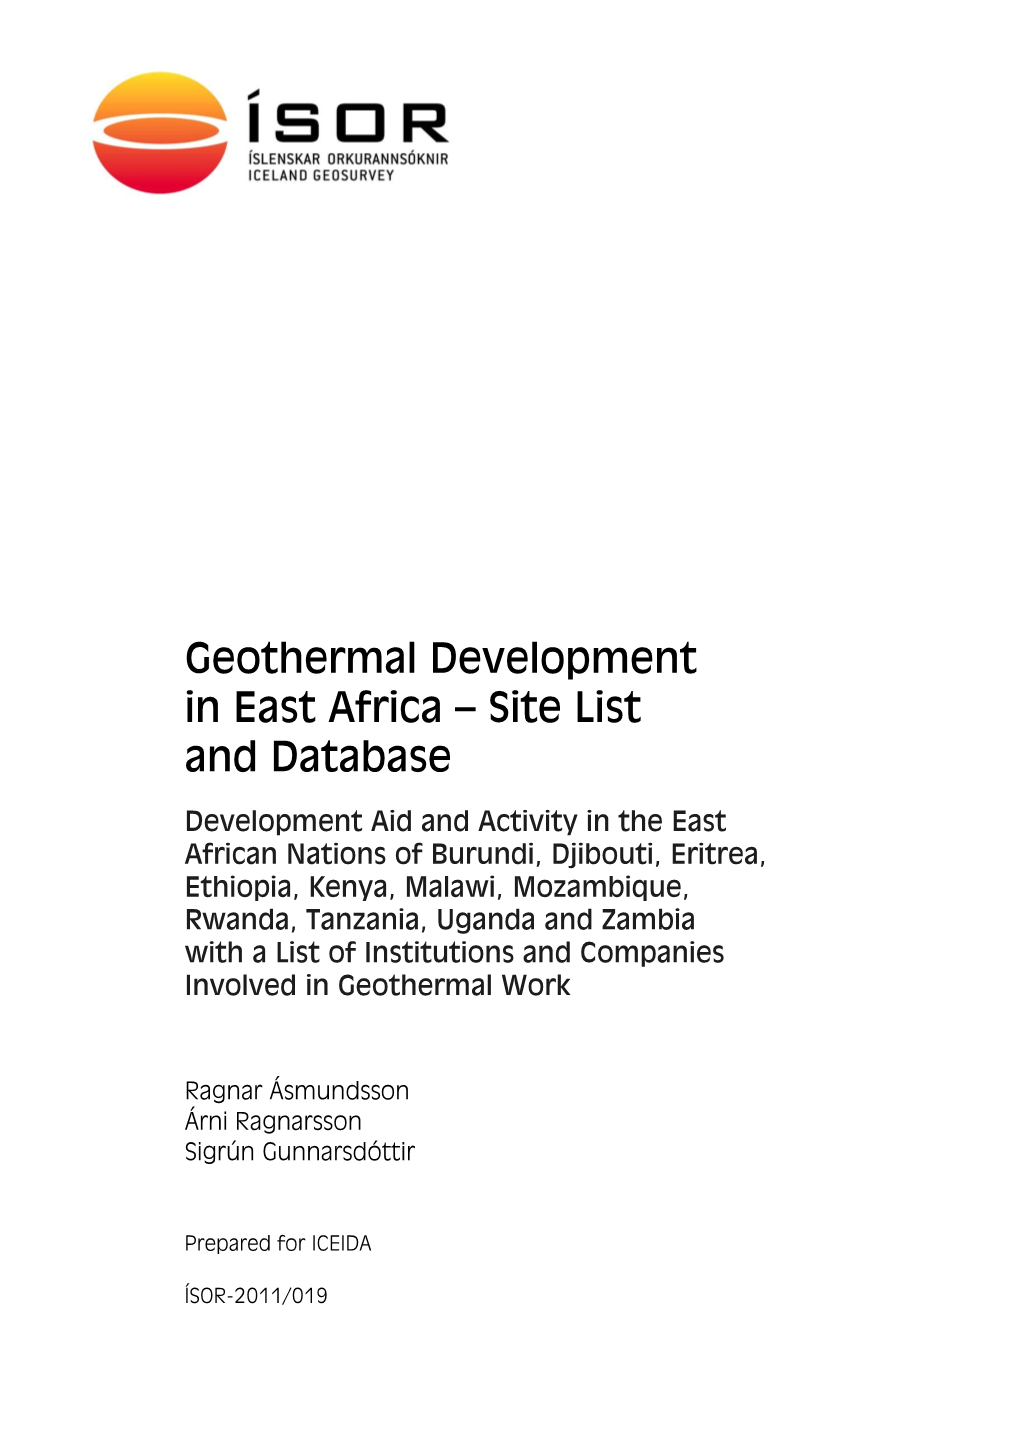 Geothermal Development in East Africa – Site List and Database